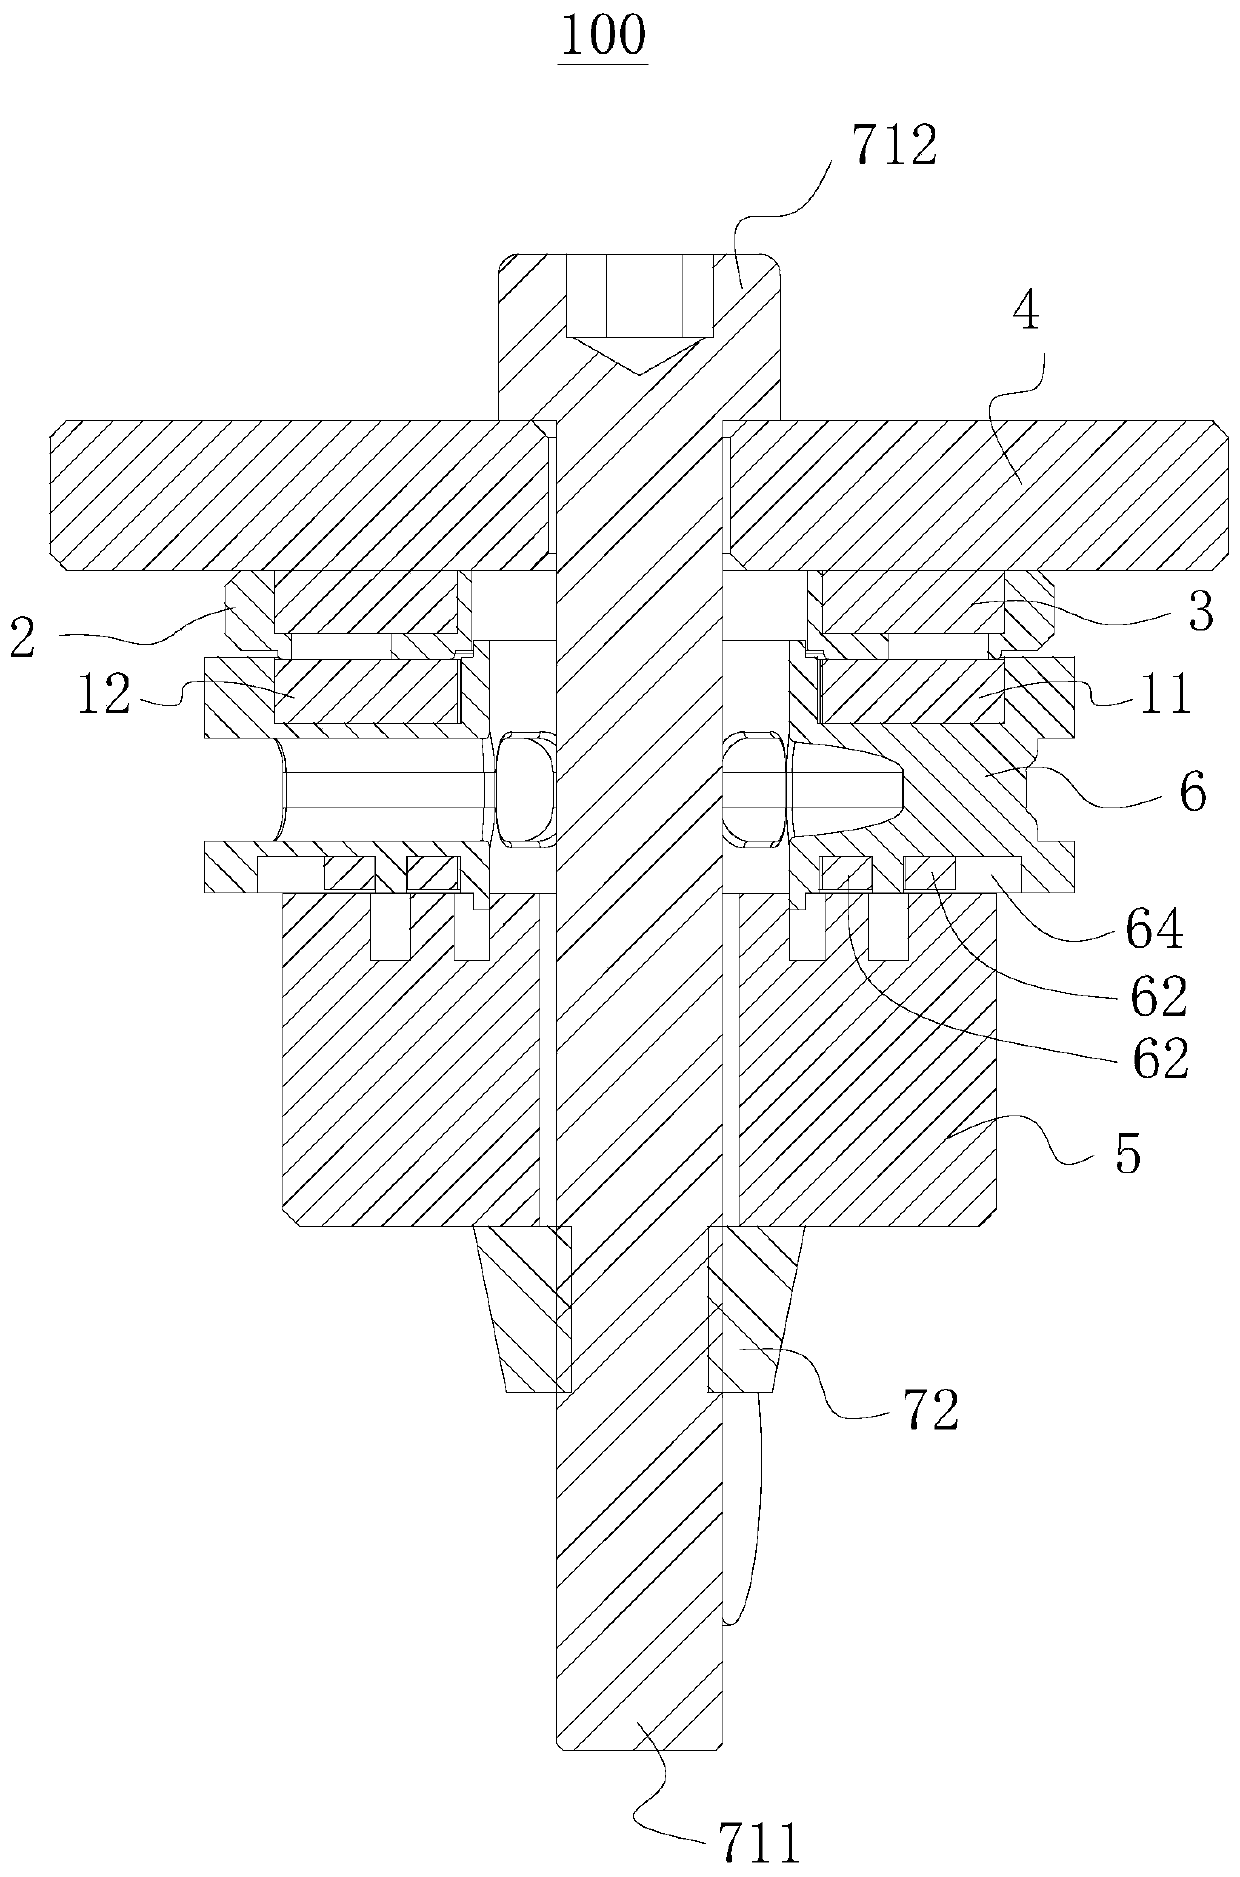 Assembly jig and assembly method of Halbach array magnets